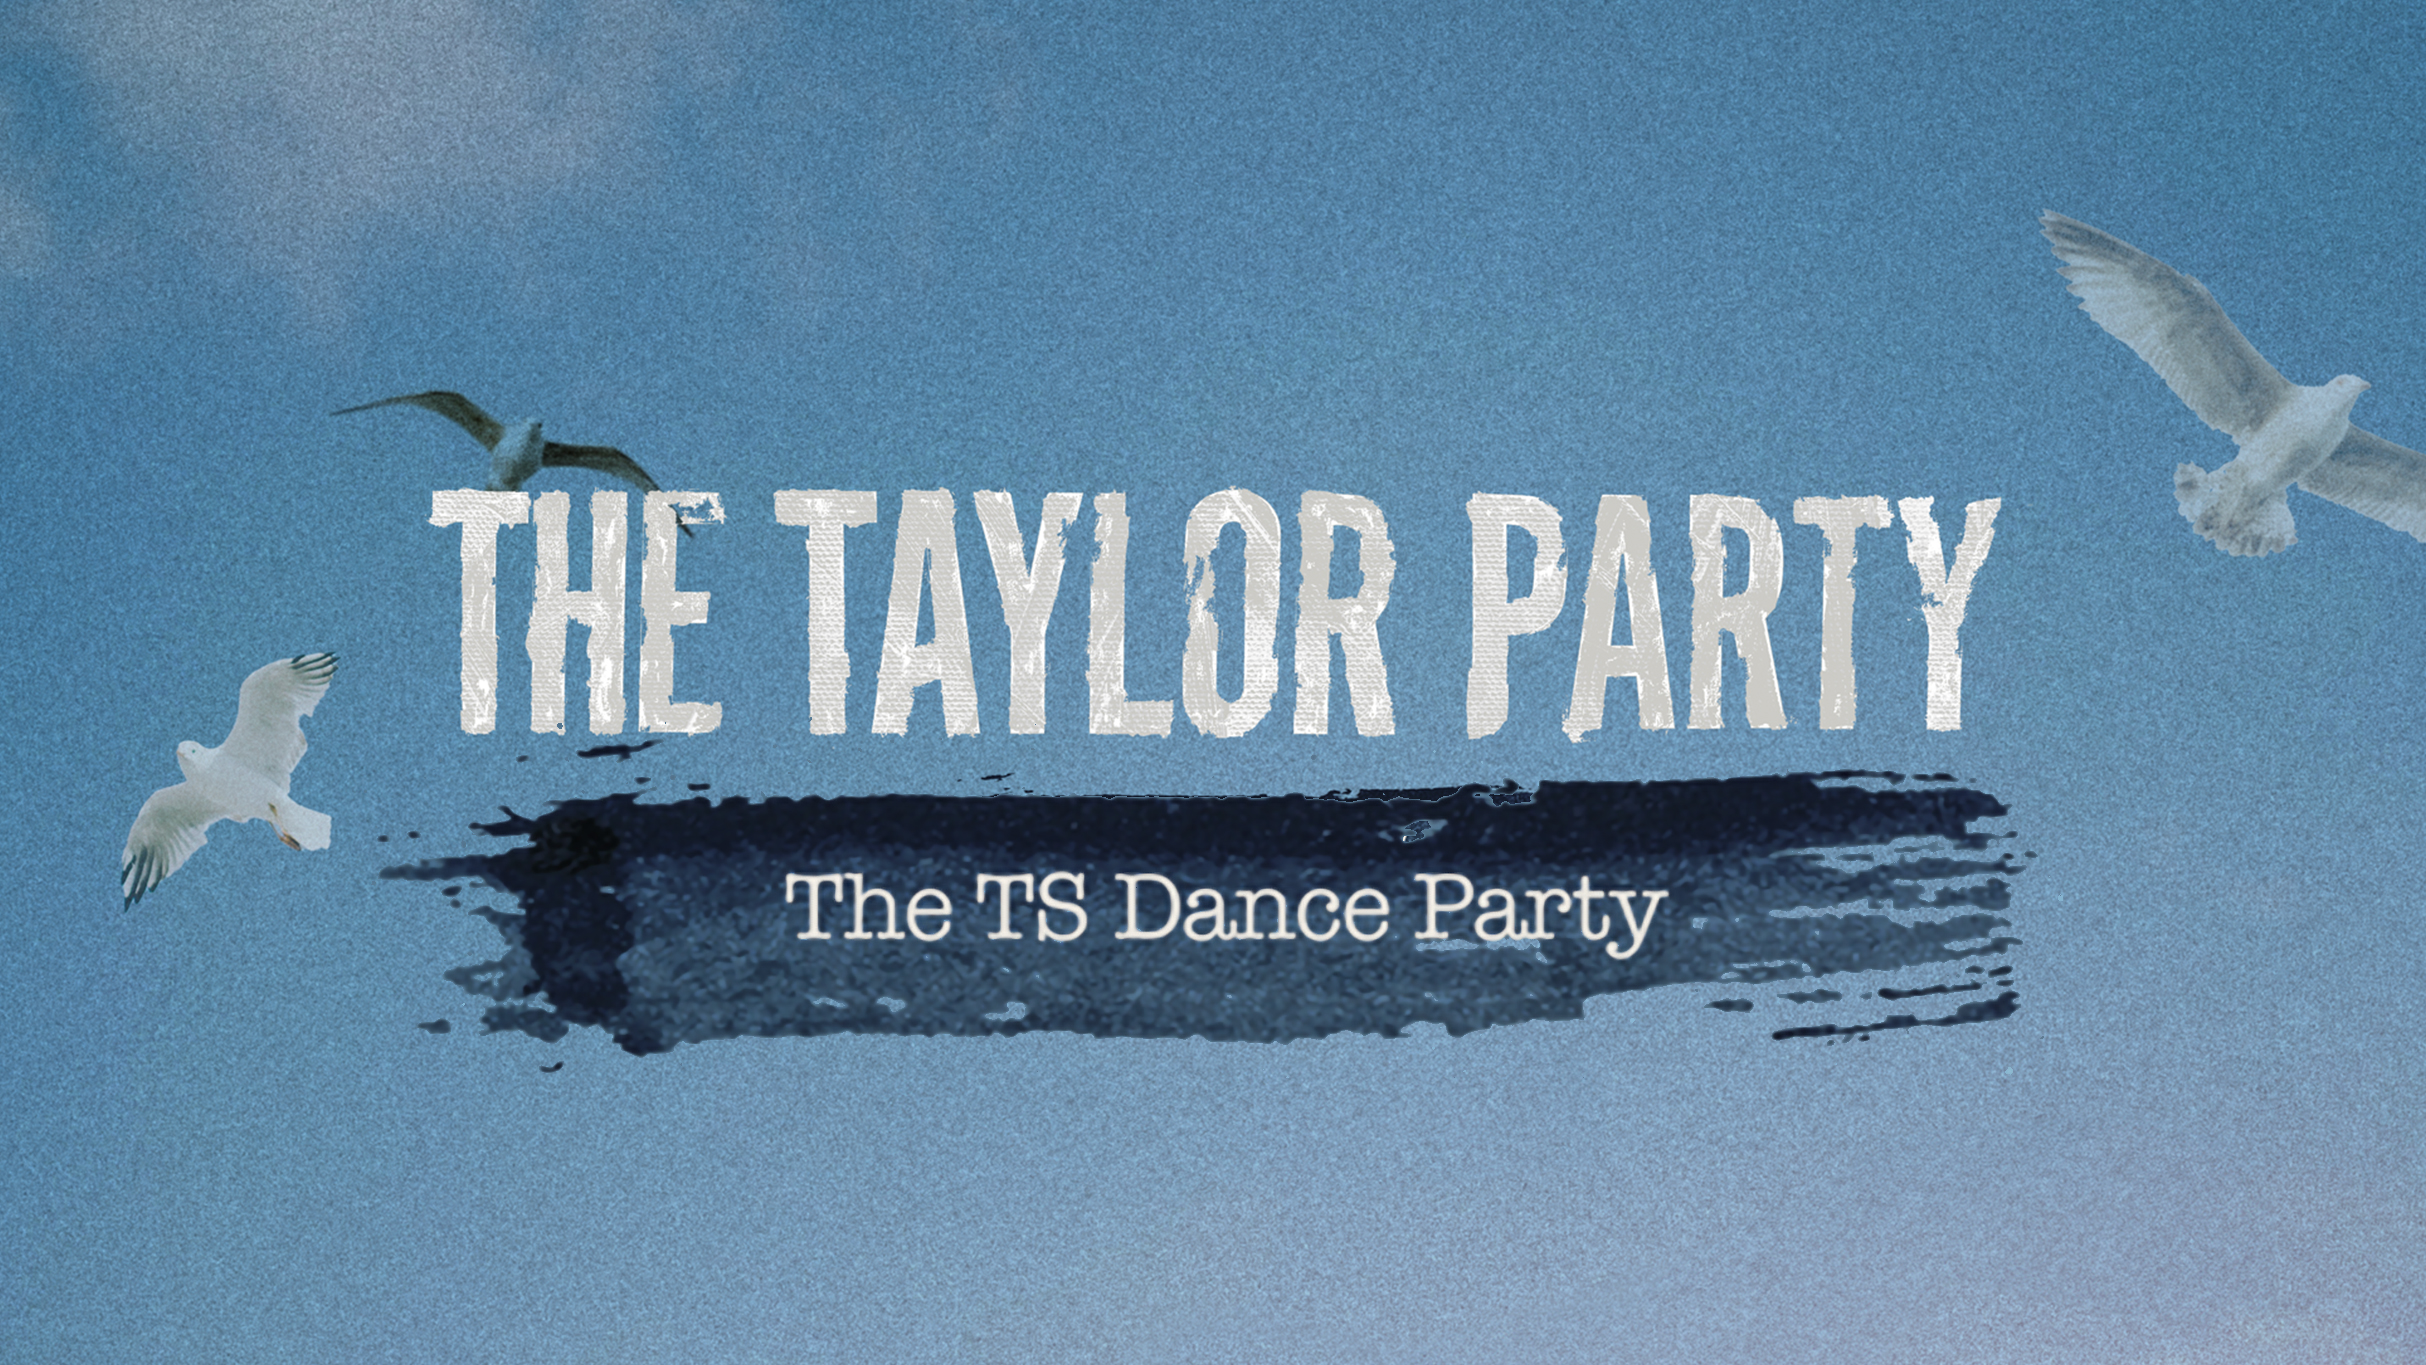 THE TAYLOR PARTY